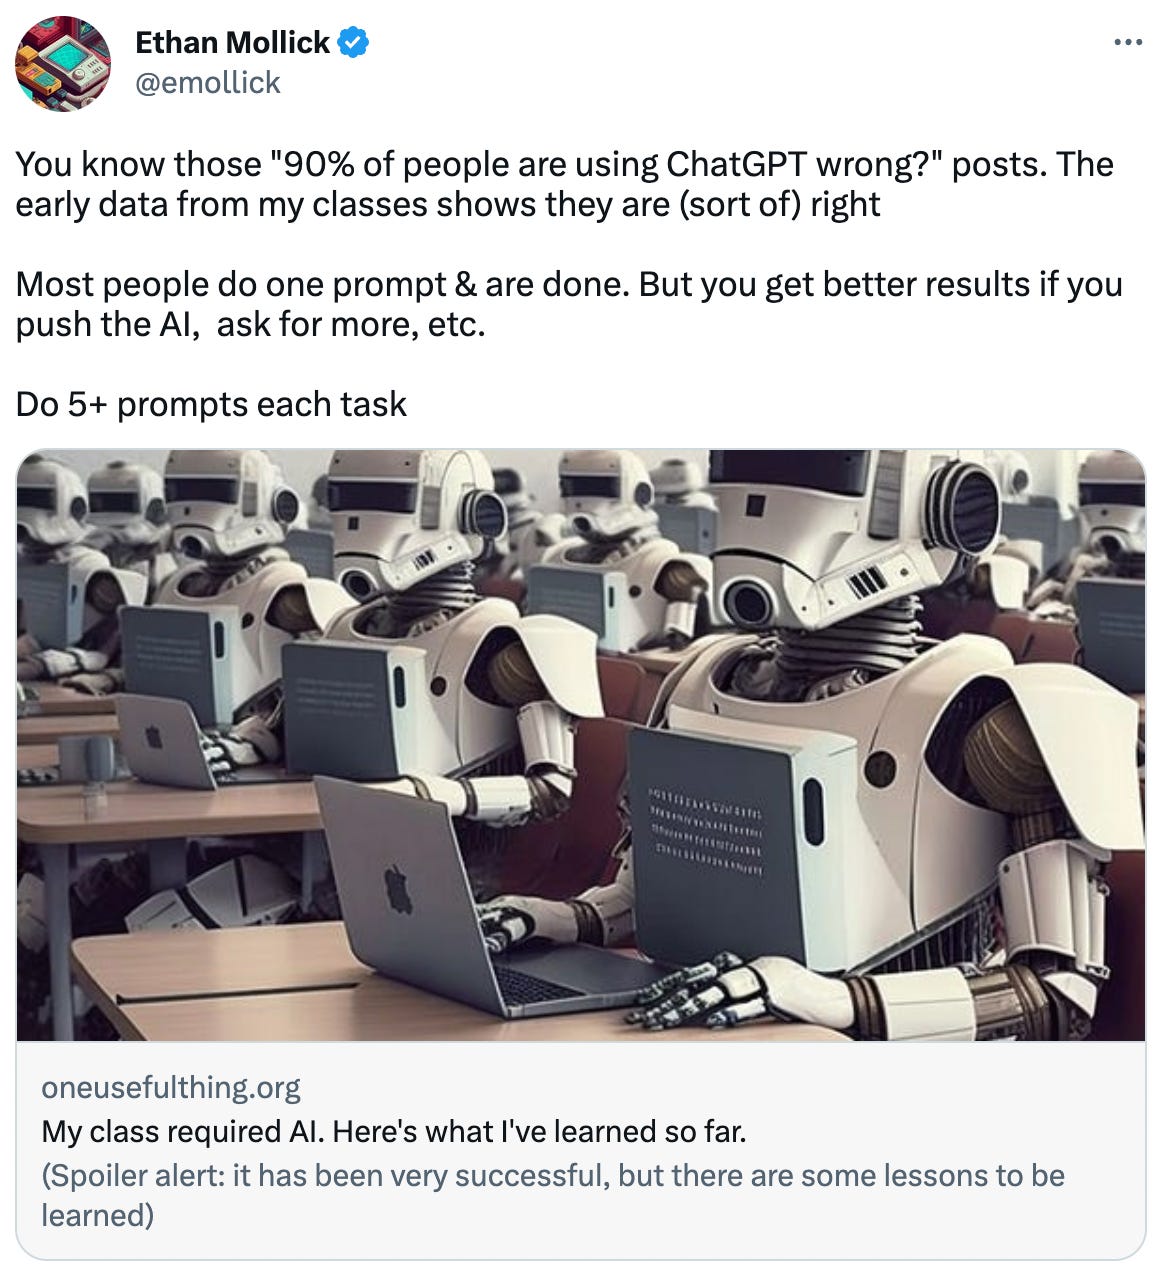  Ethan Mollick @emollick You know those "90% of people are using ChatGPT wrong?" posts. The early data from my classes shows they are (sort of) right  Most people do one prompt & are done. But you get better results if you push the AI,  ask for more, etc.   Do 5+ prompts each task